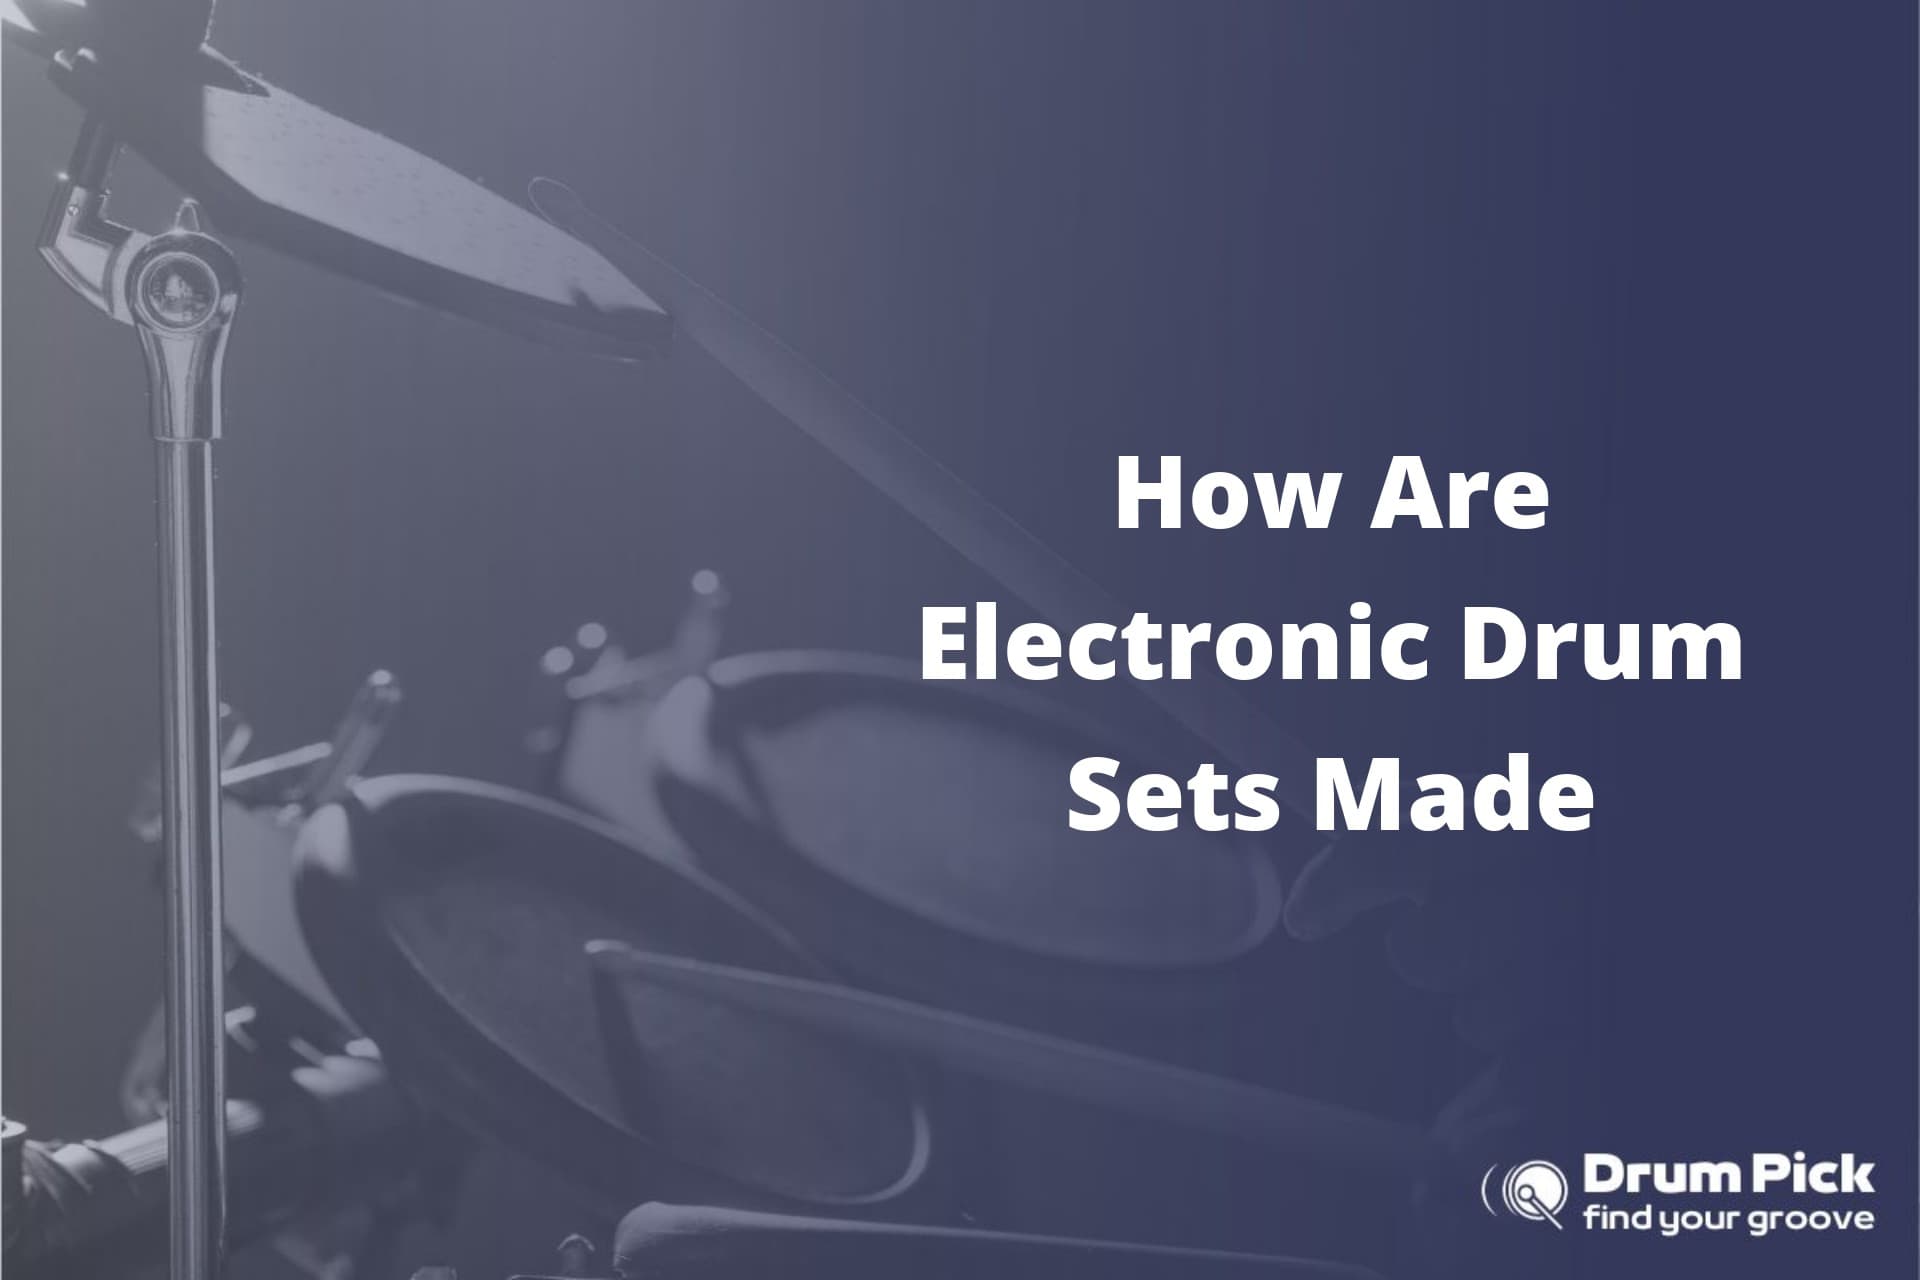 How Are Electronic Drum Sets Made